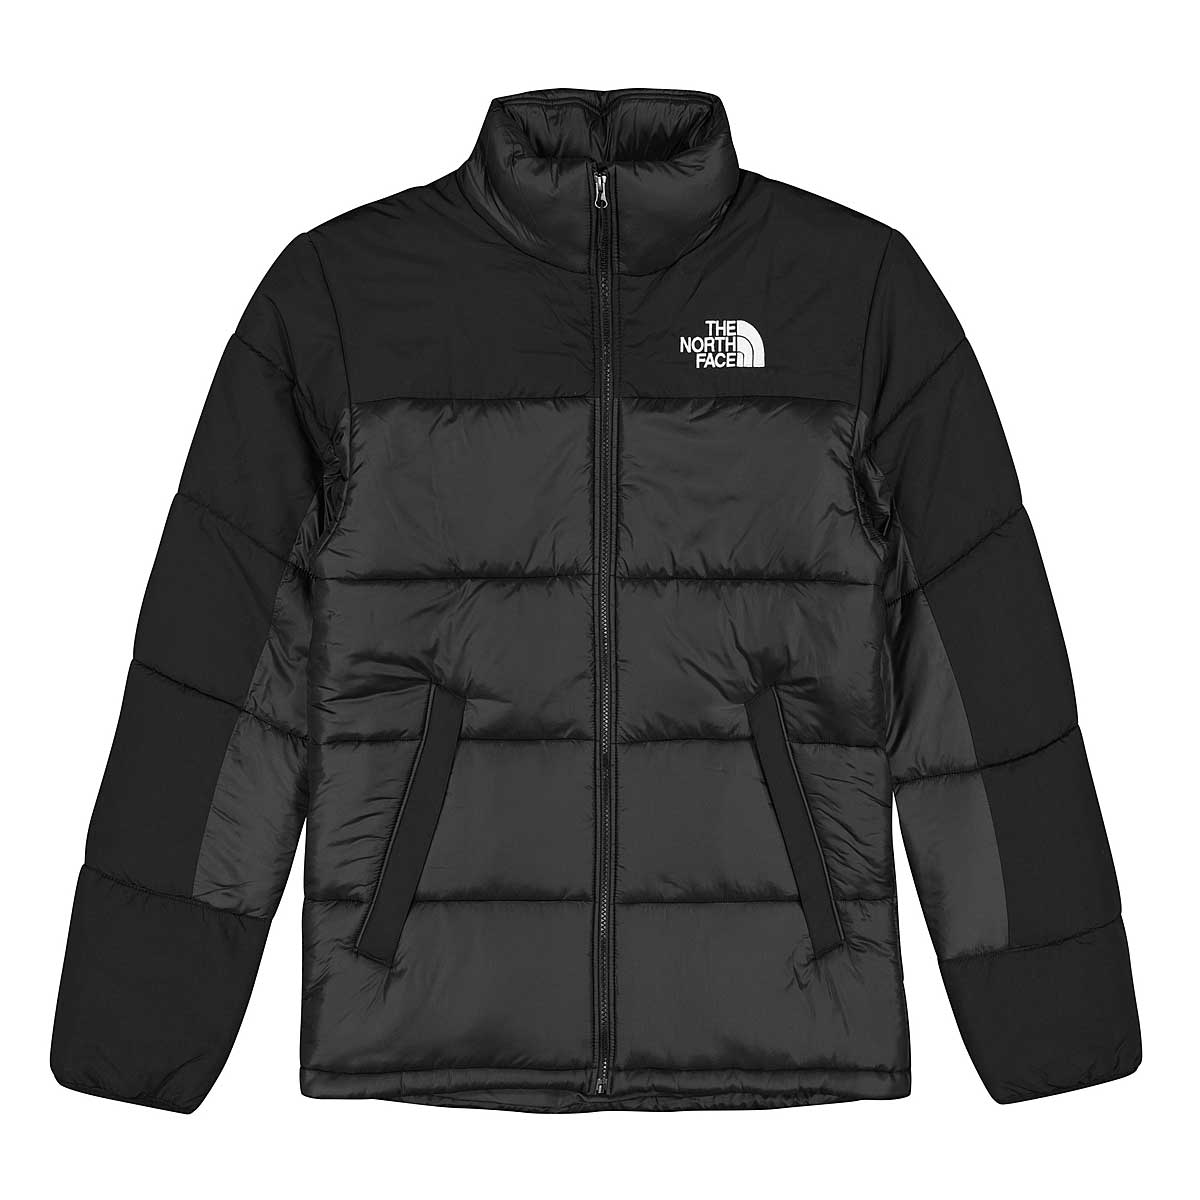 The North Face Himalayan Insulated Jacket, Tnf Black